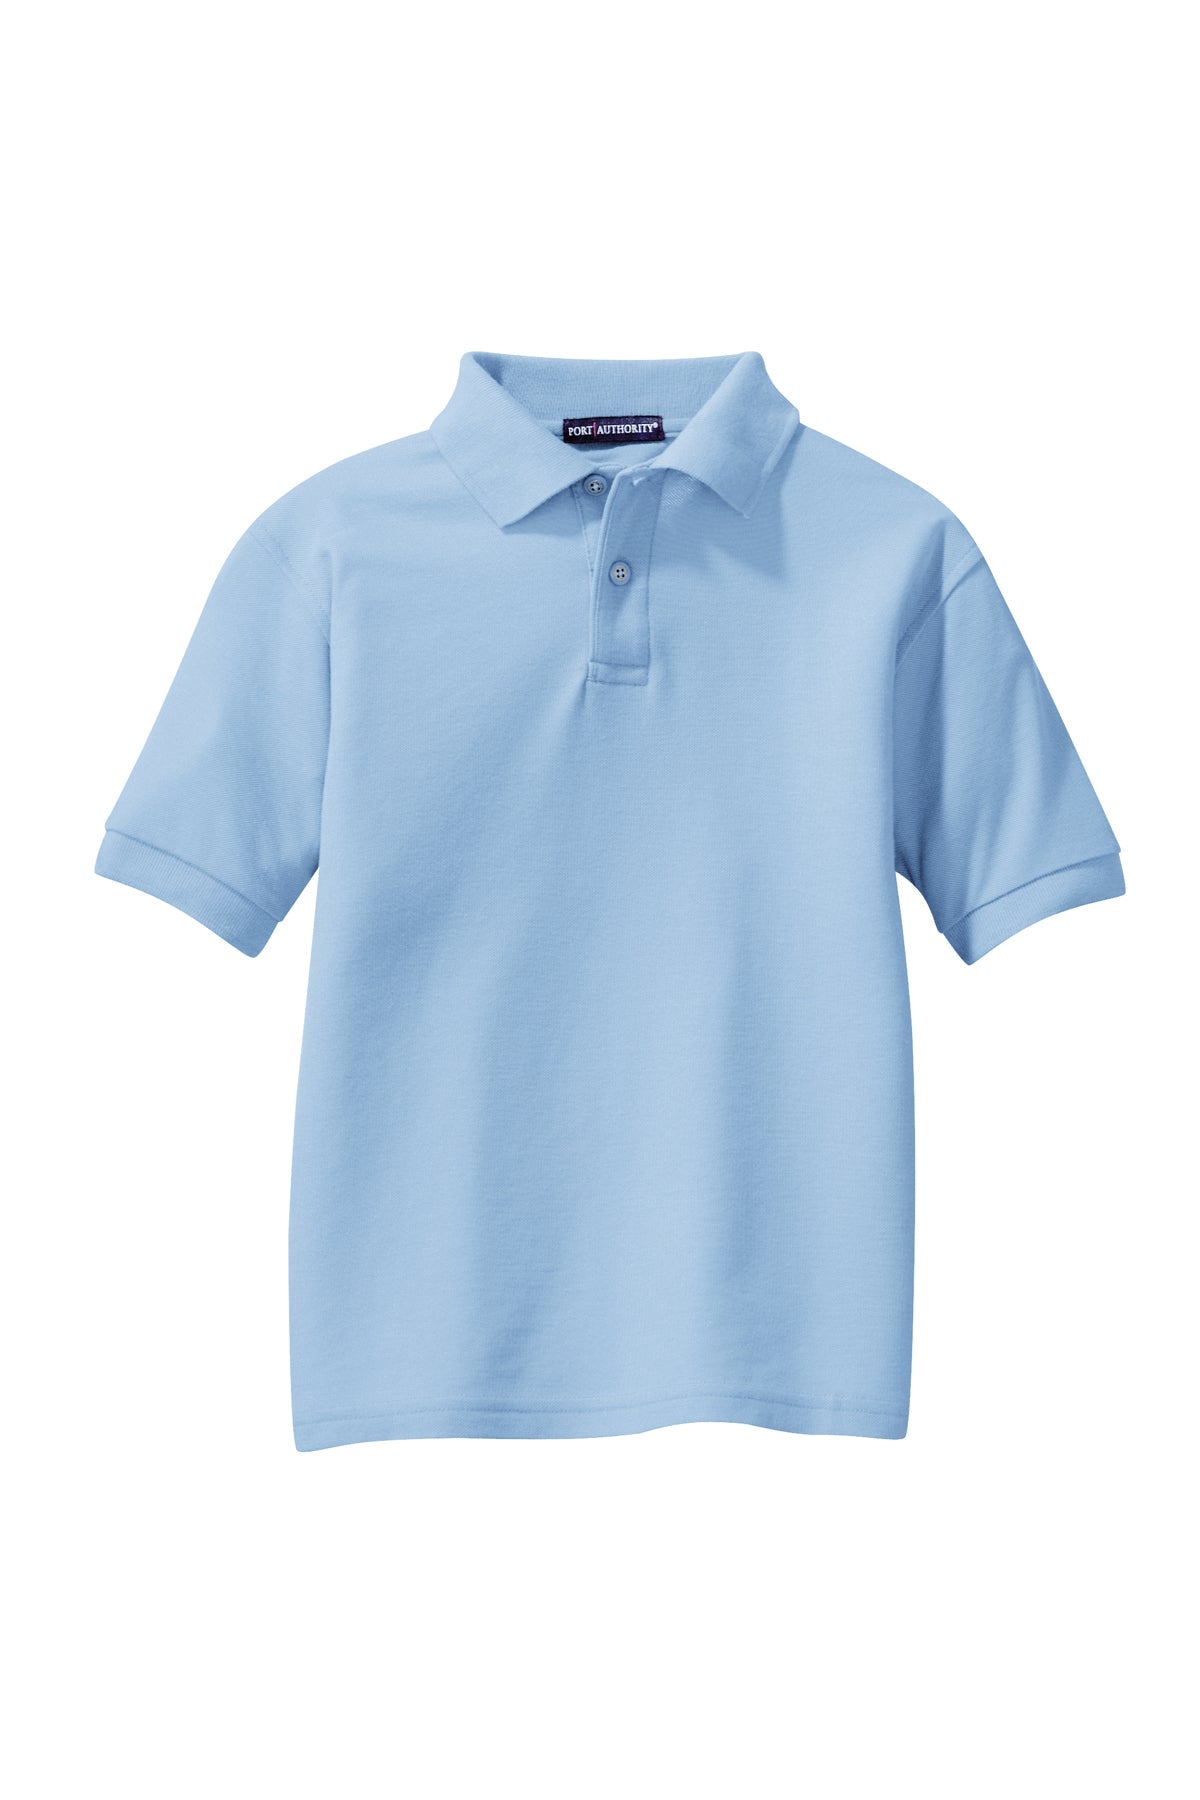 Y500 Port Authority® Youth Silk Touch™ Polo